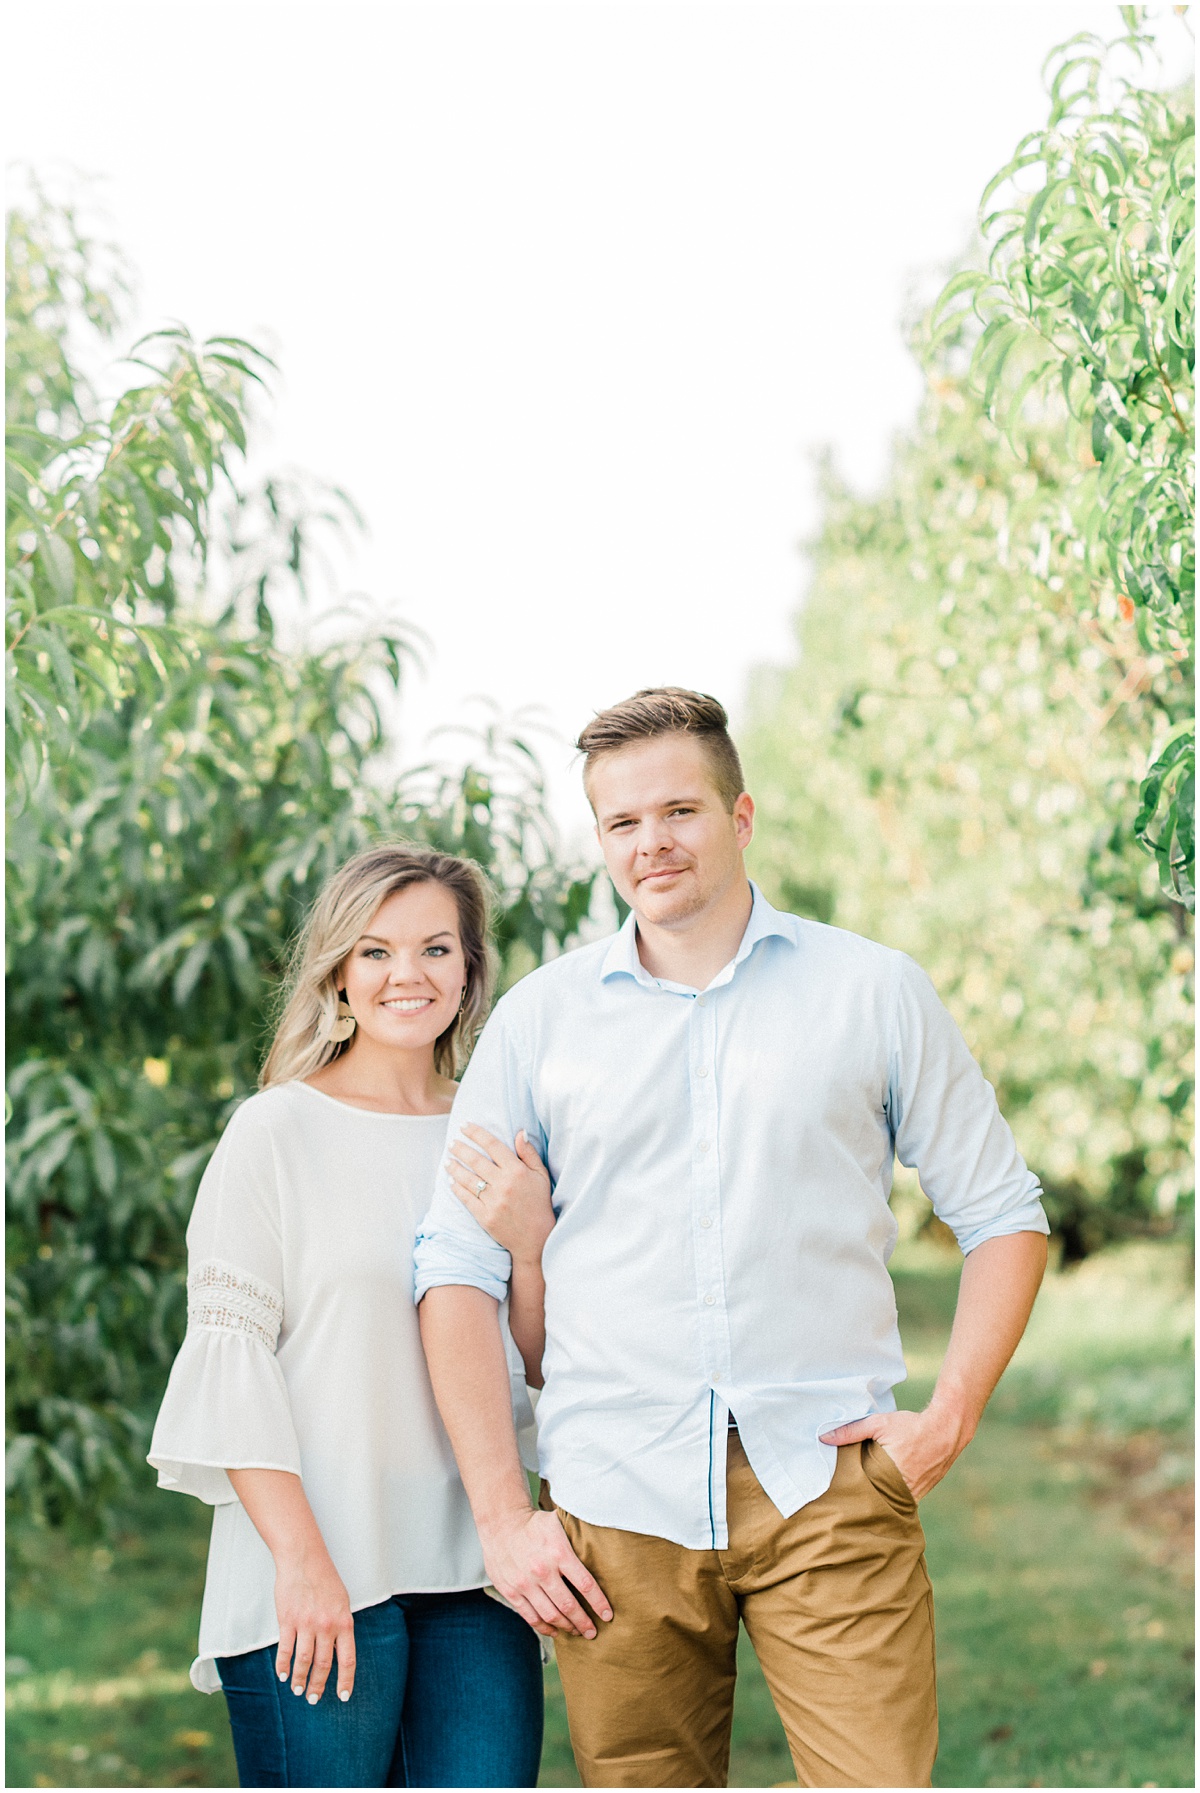 Orchard engagement session